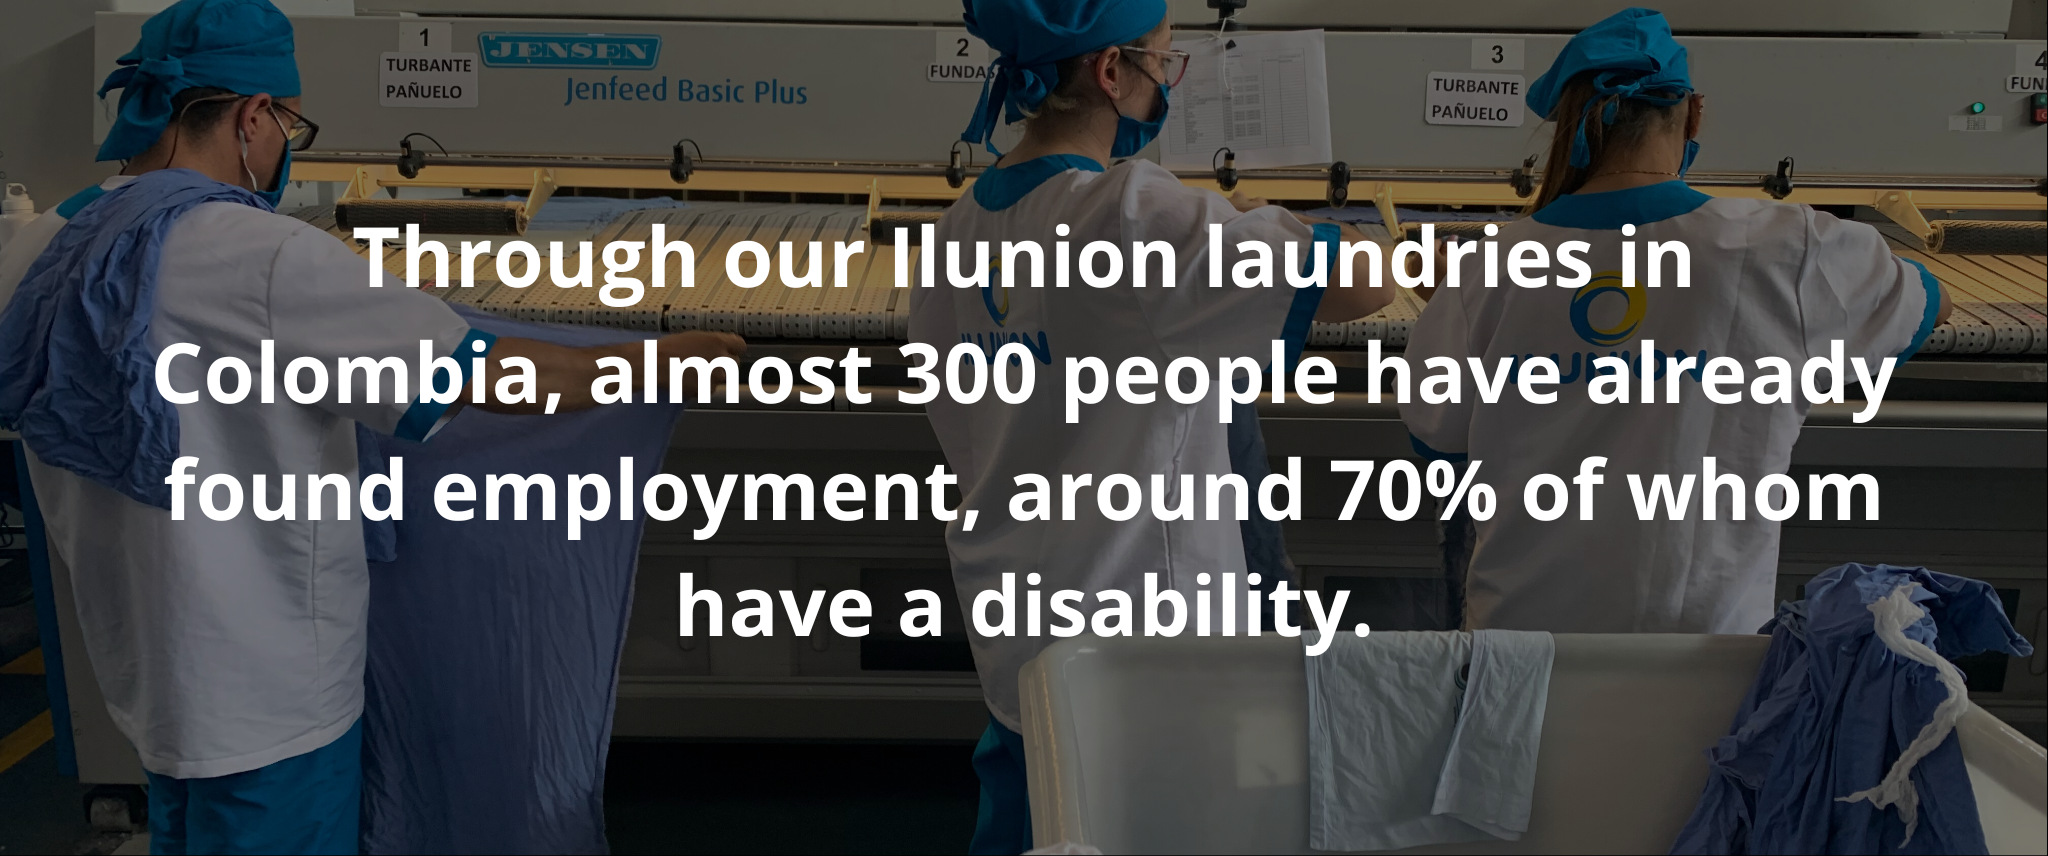 Through our Ilunion laundries in Colombia, almost 300 people have already found employment, around 70% of whom have a disability.